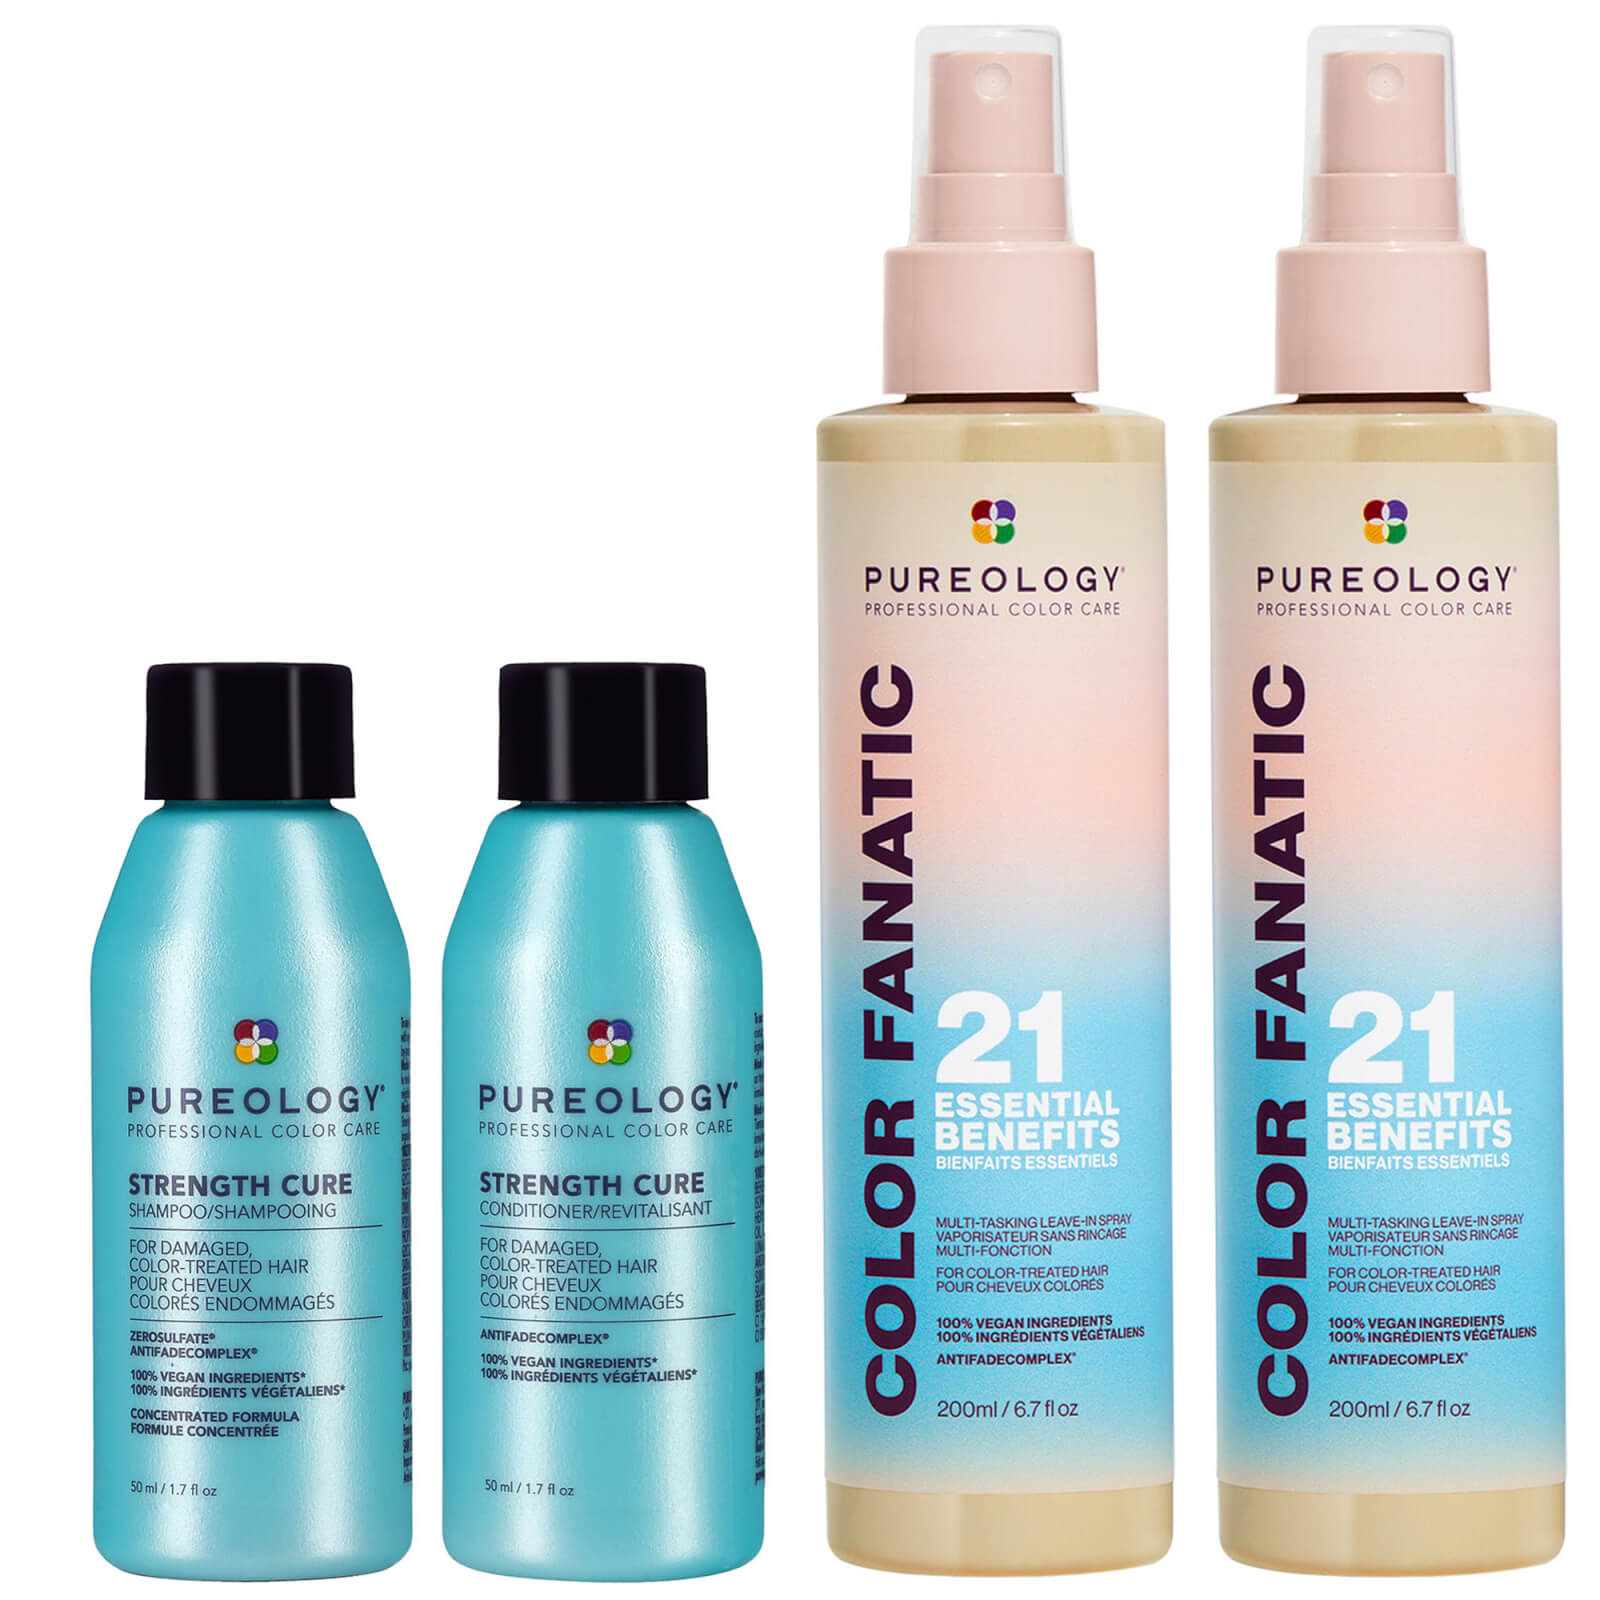 Pureology Color Fanatic Duo (2x 200ml) + Strength Cure Mini 50ml Shampoo & Conditioner For Damaged, Coloured Hair (Worth £72.46)